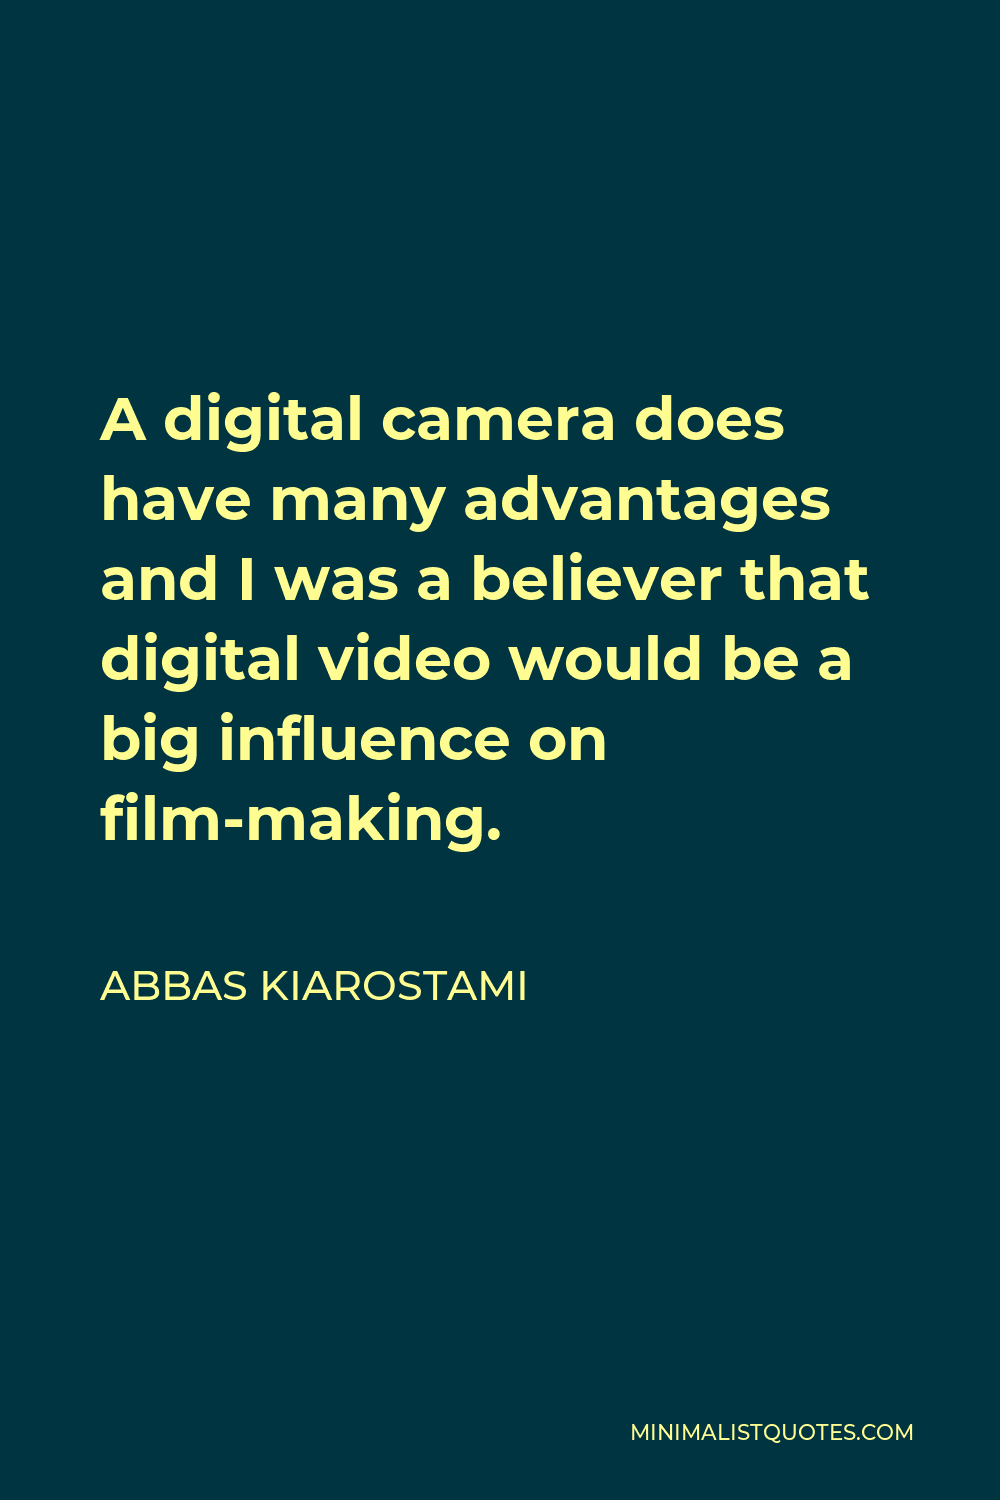 Abbas Kiarostami Quote - A digital camera does have many advantages and I was a believer that digital video would be a big influence on film-making.